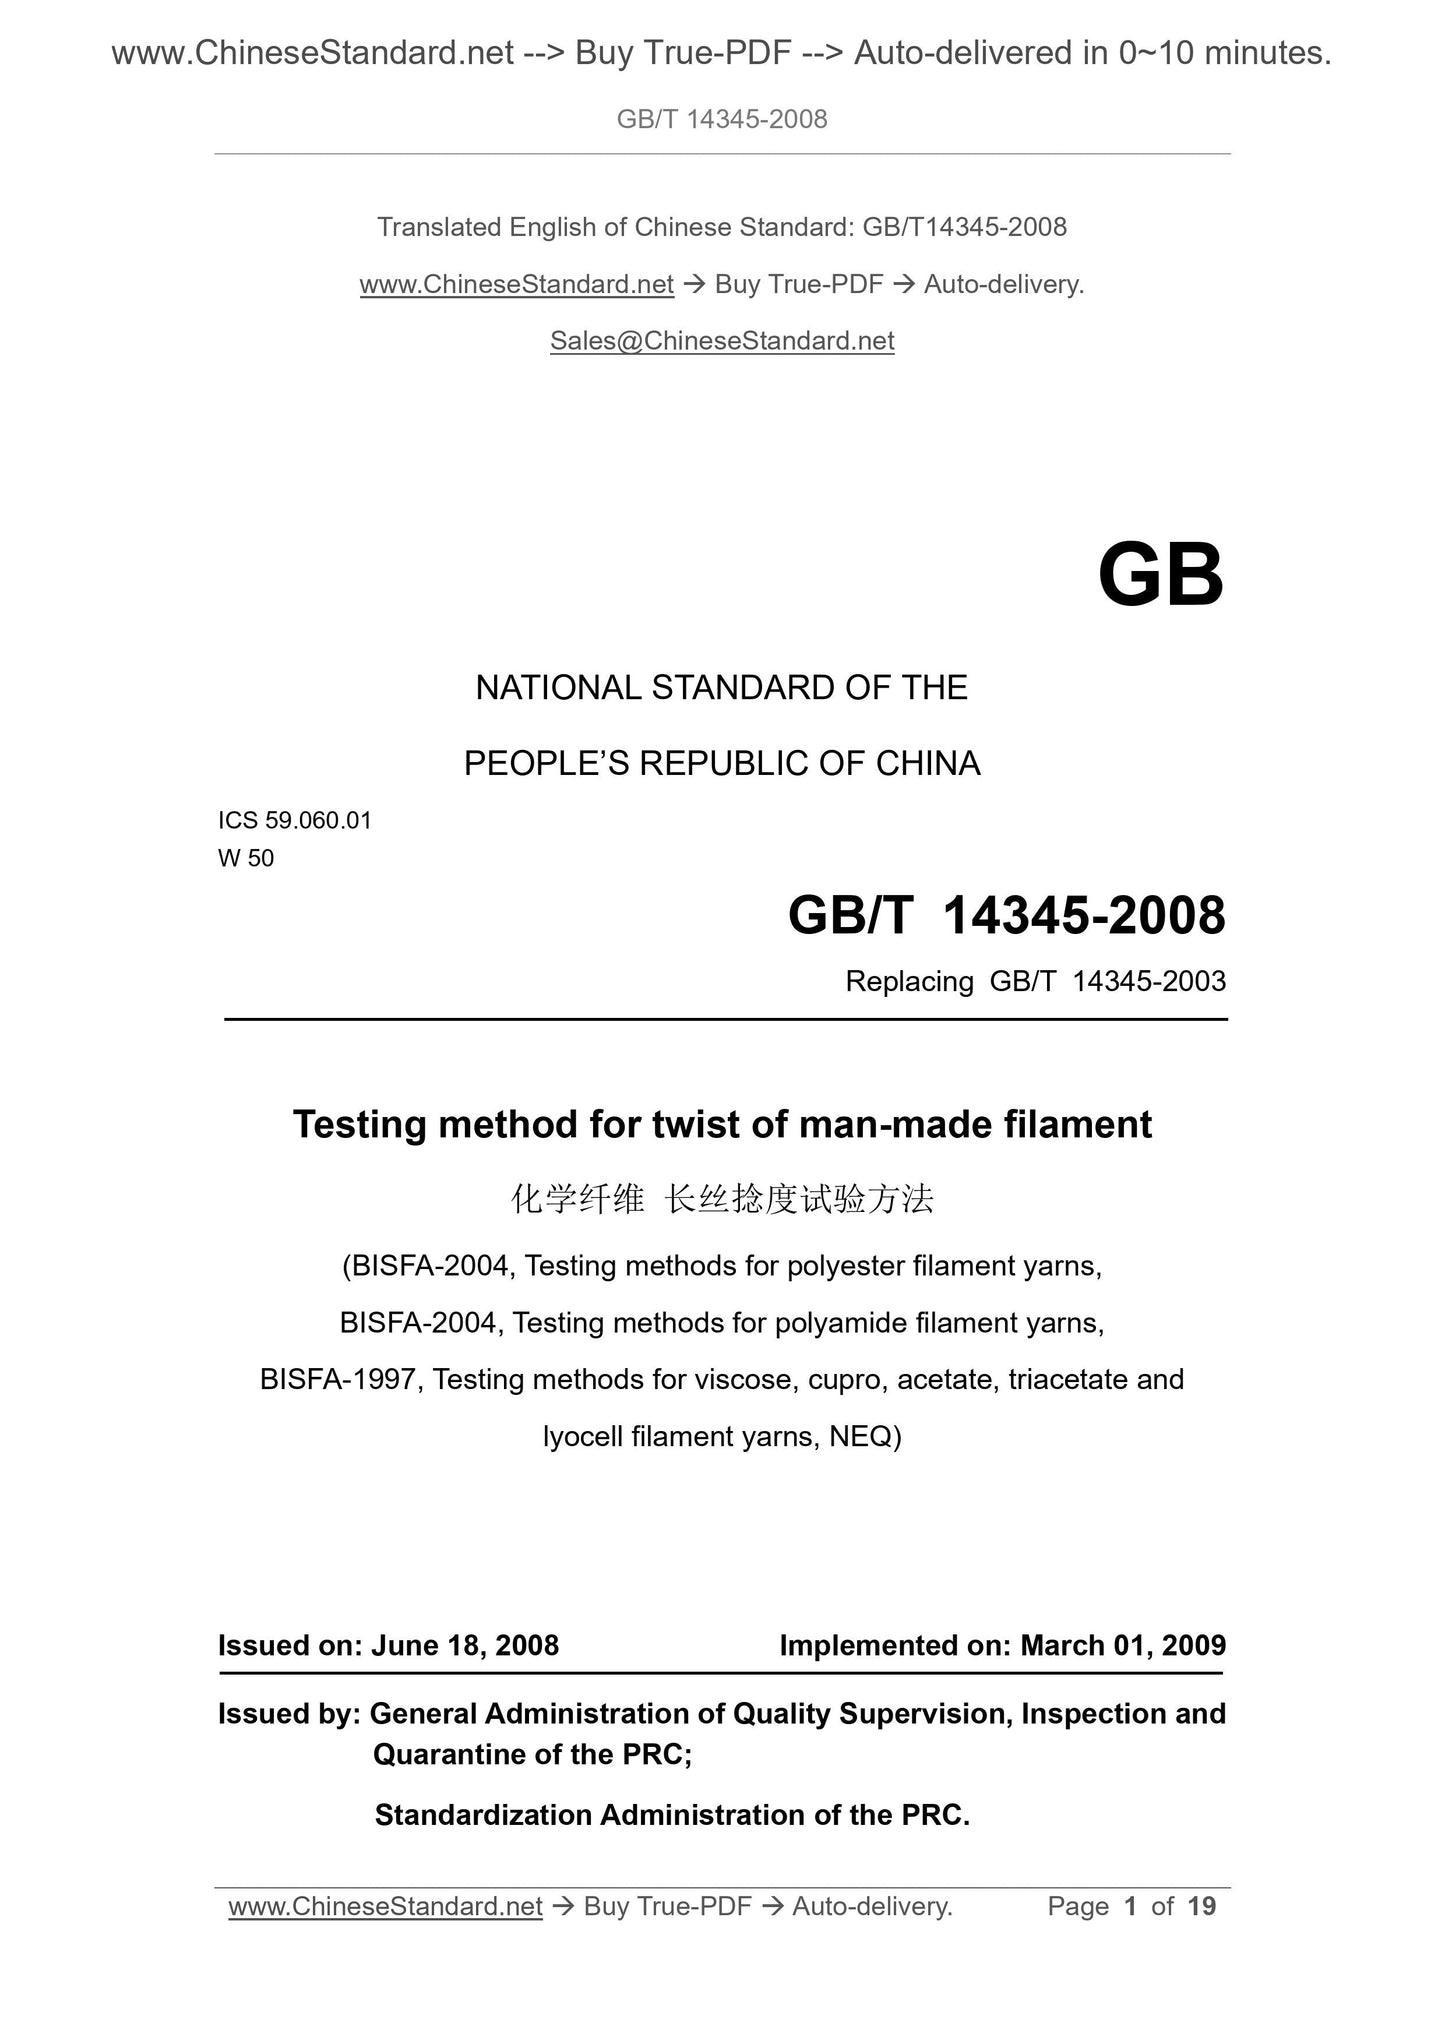 GB/T 14345-2008 Page 1